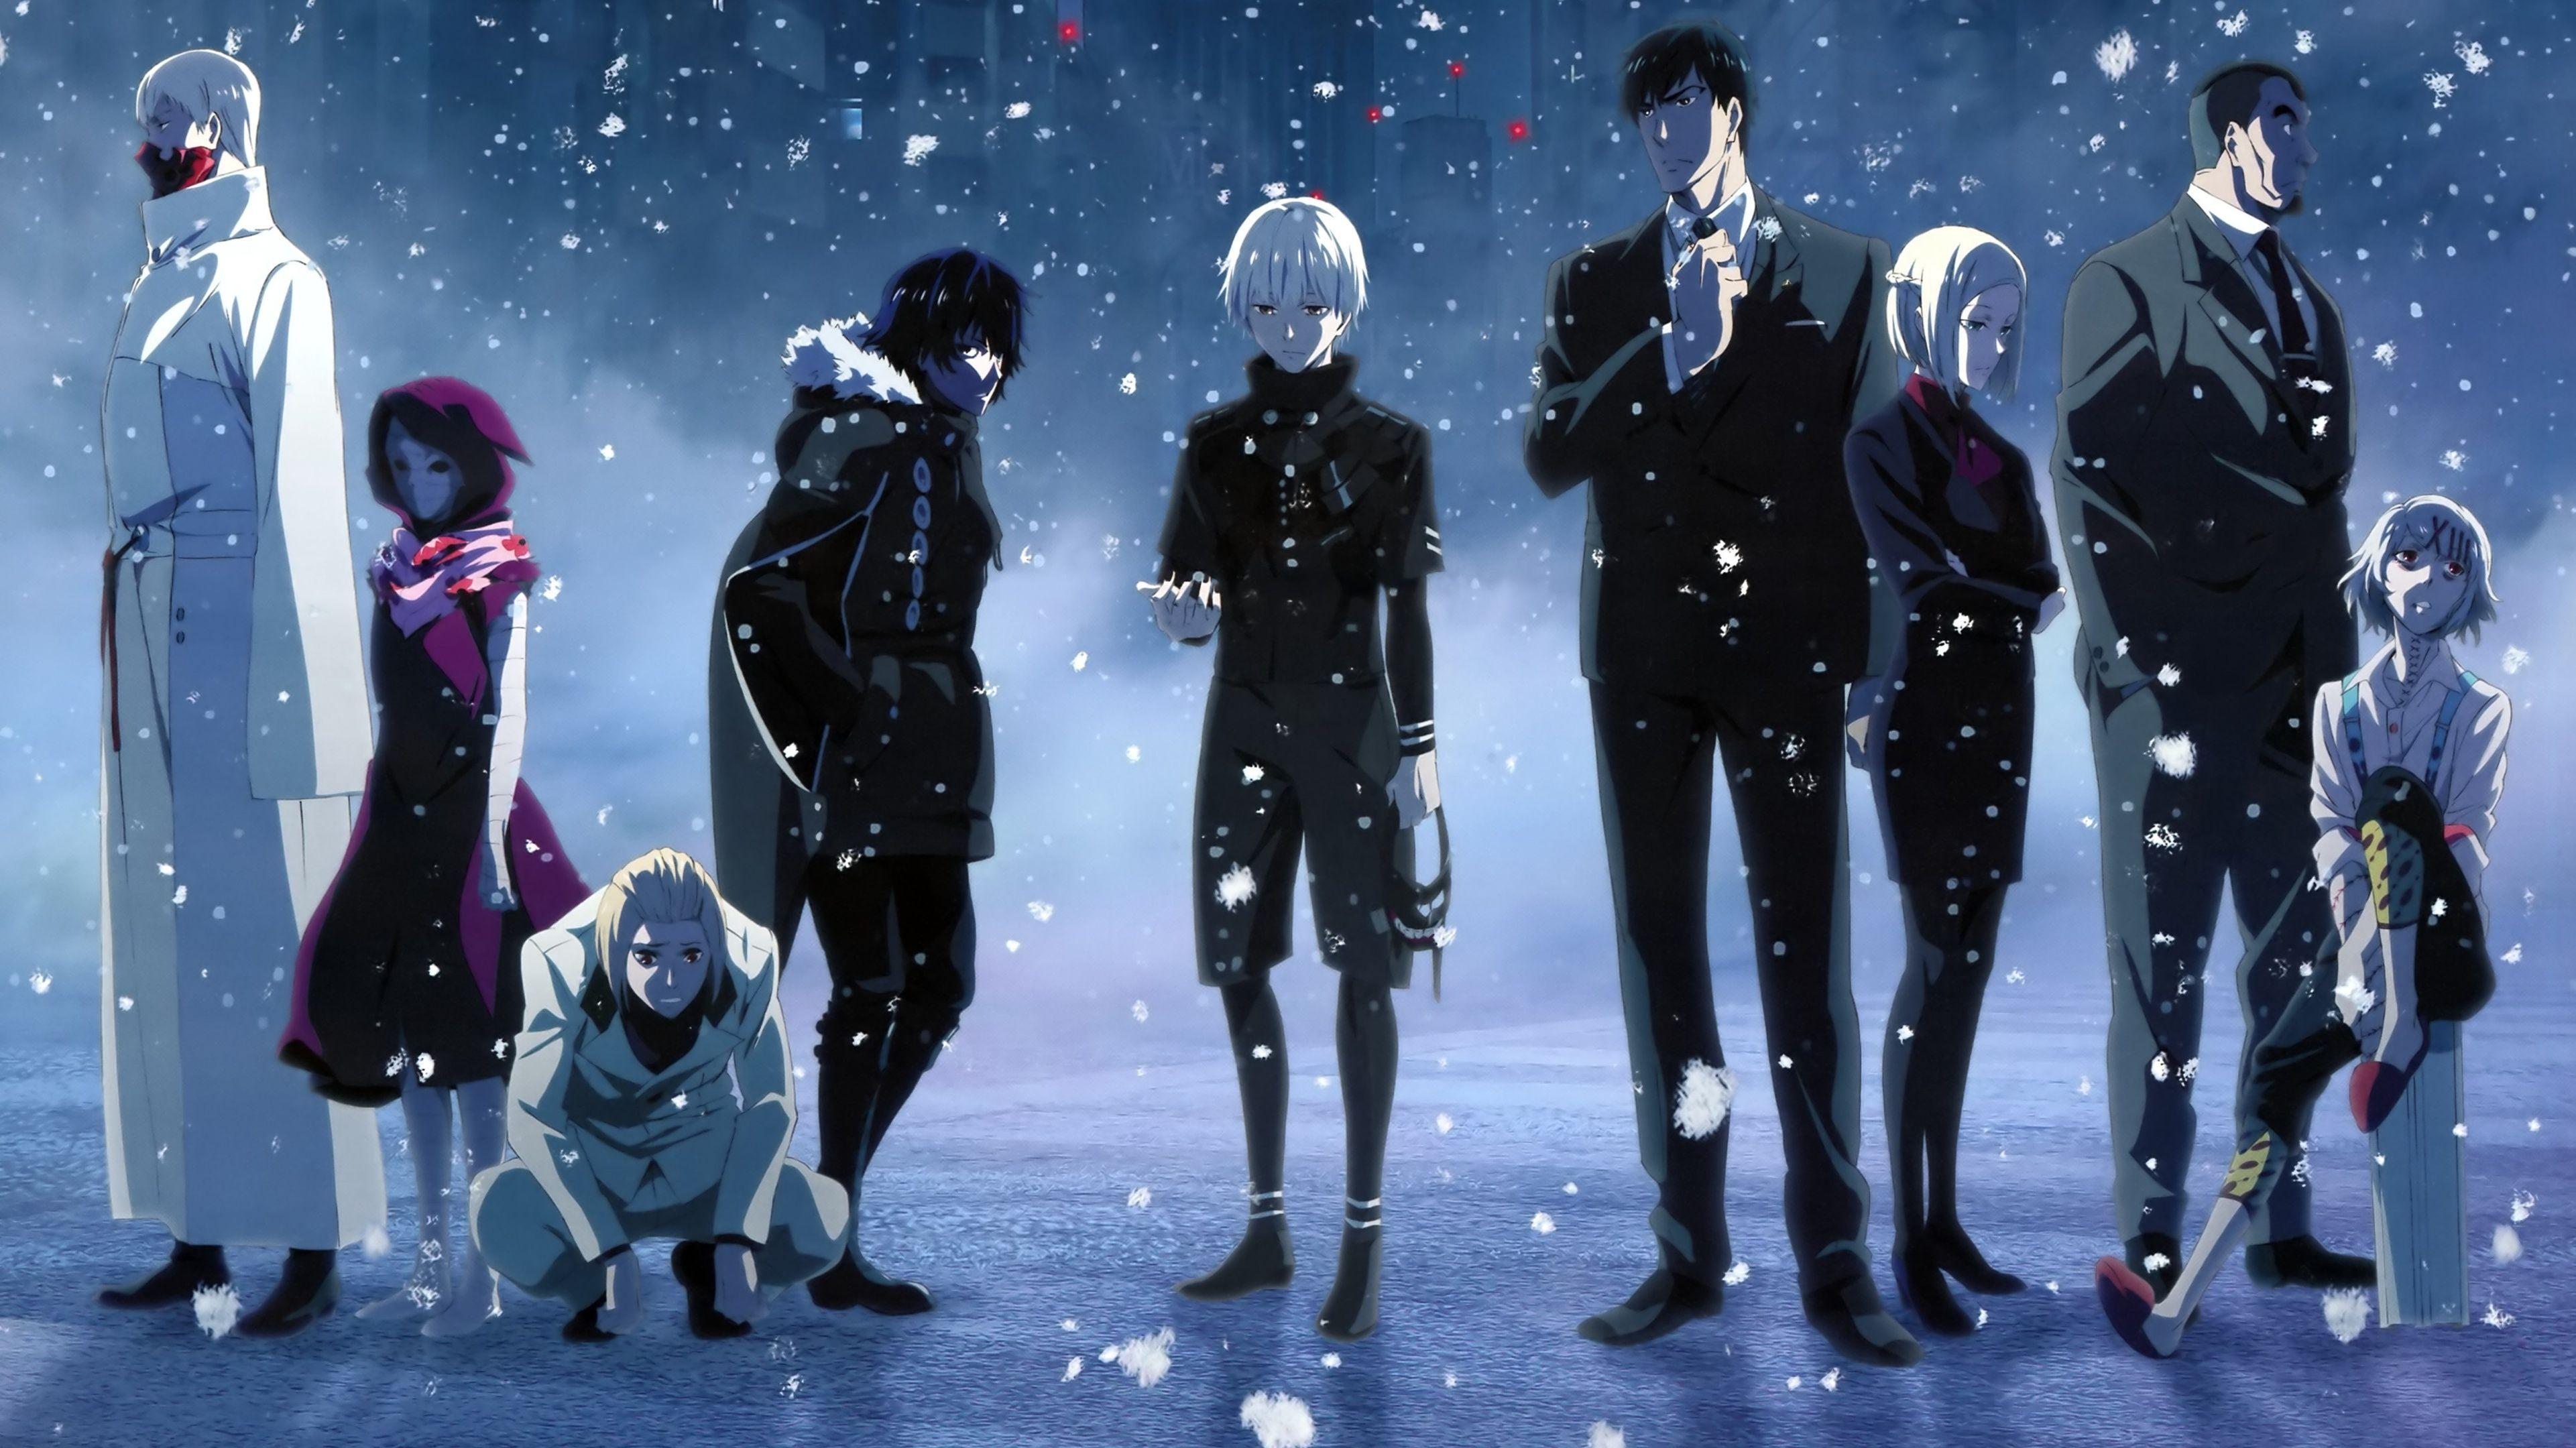 Tokyo Ghoul characters 4K Ultra HD wallpapers